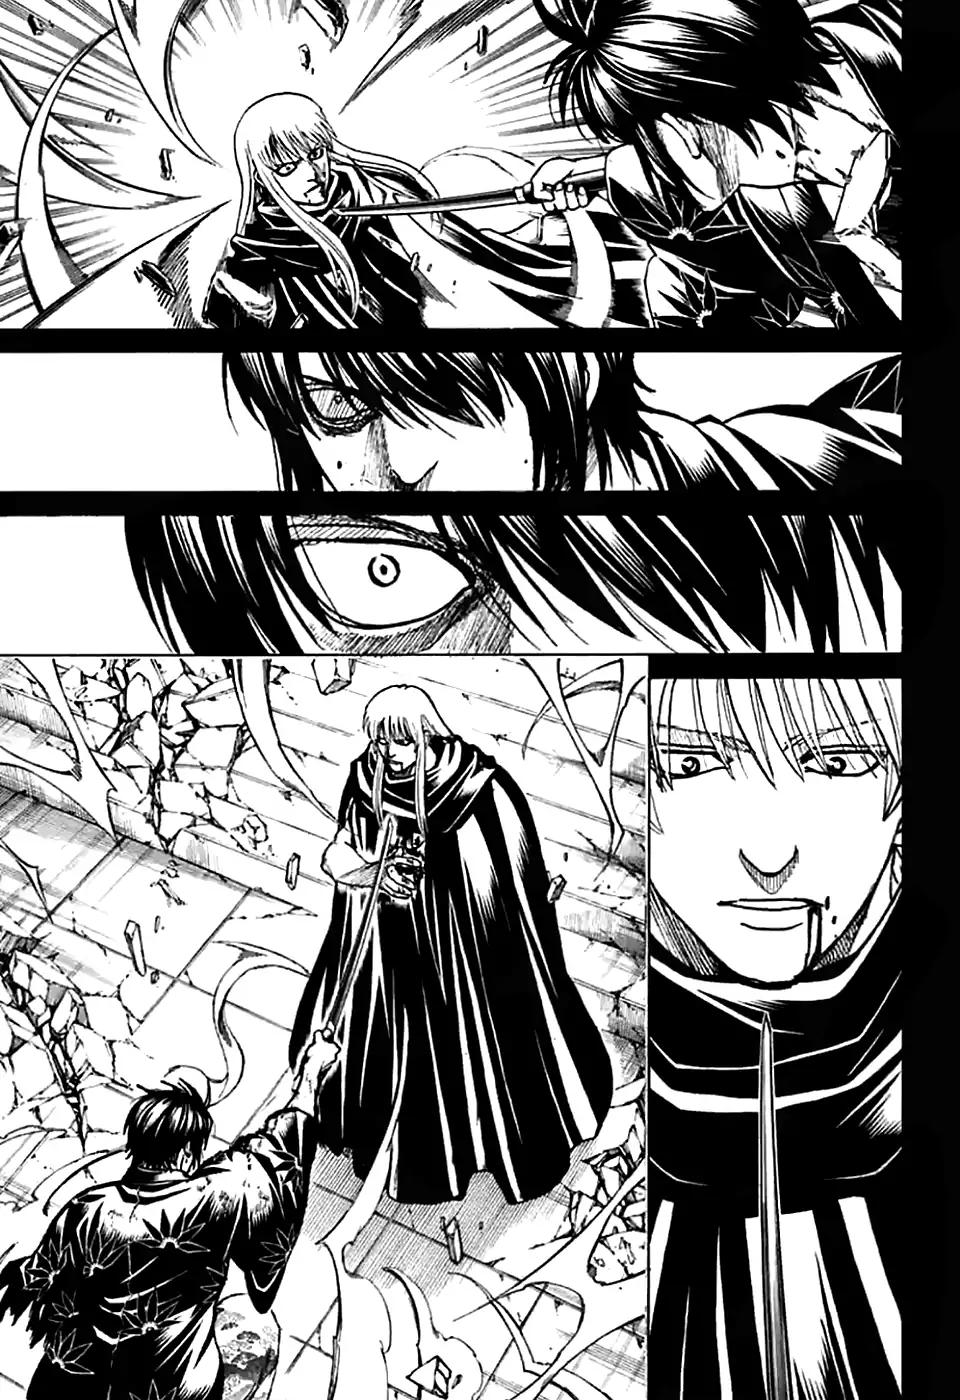 Gintama chapter 703 page 9